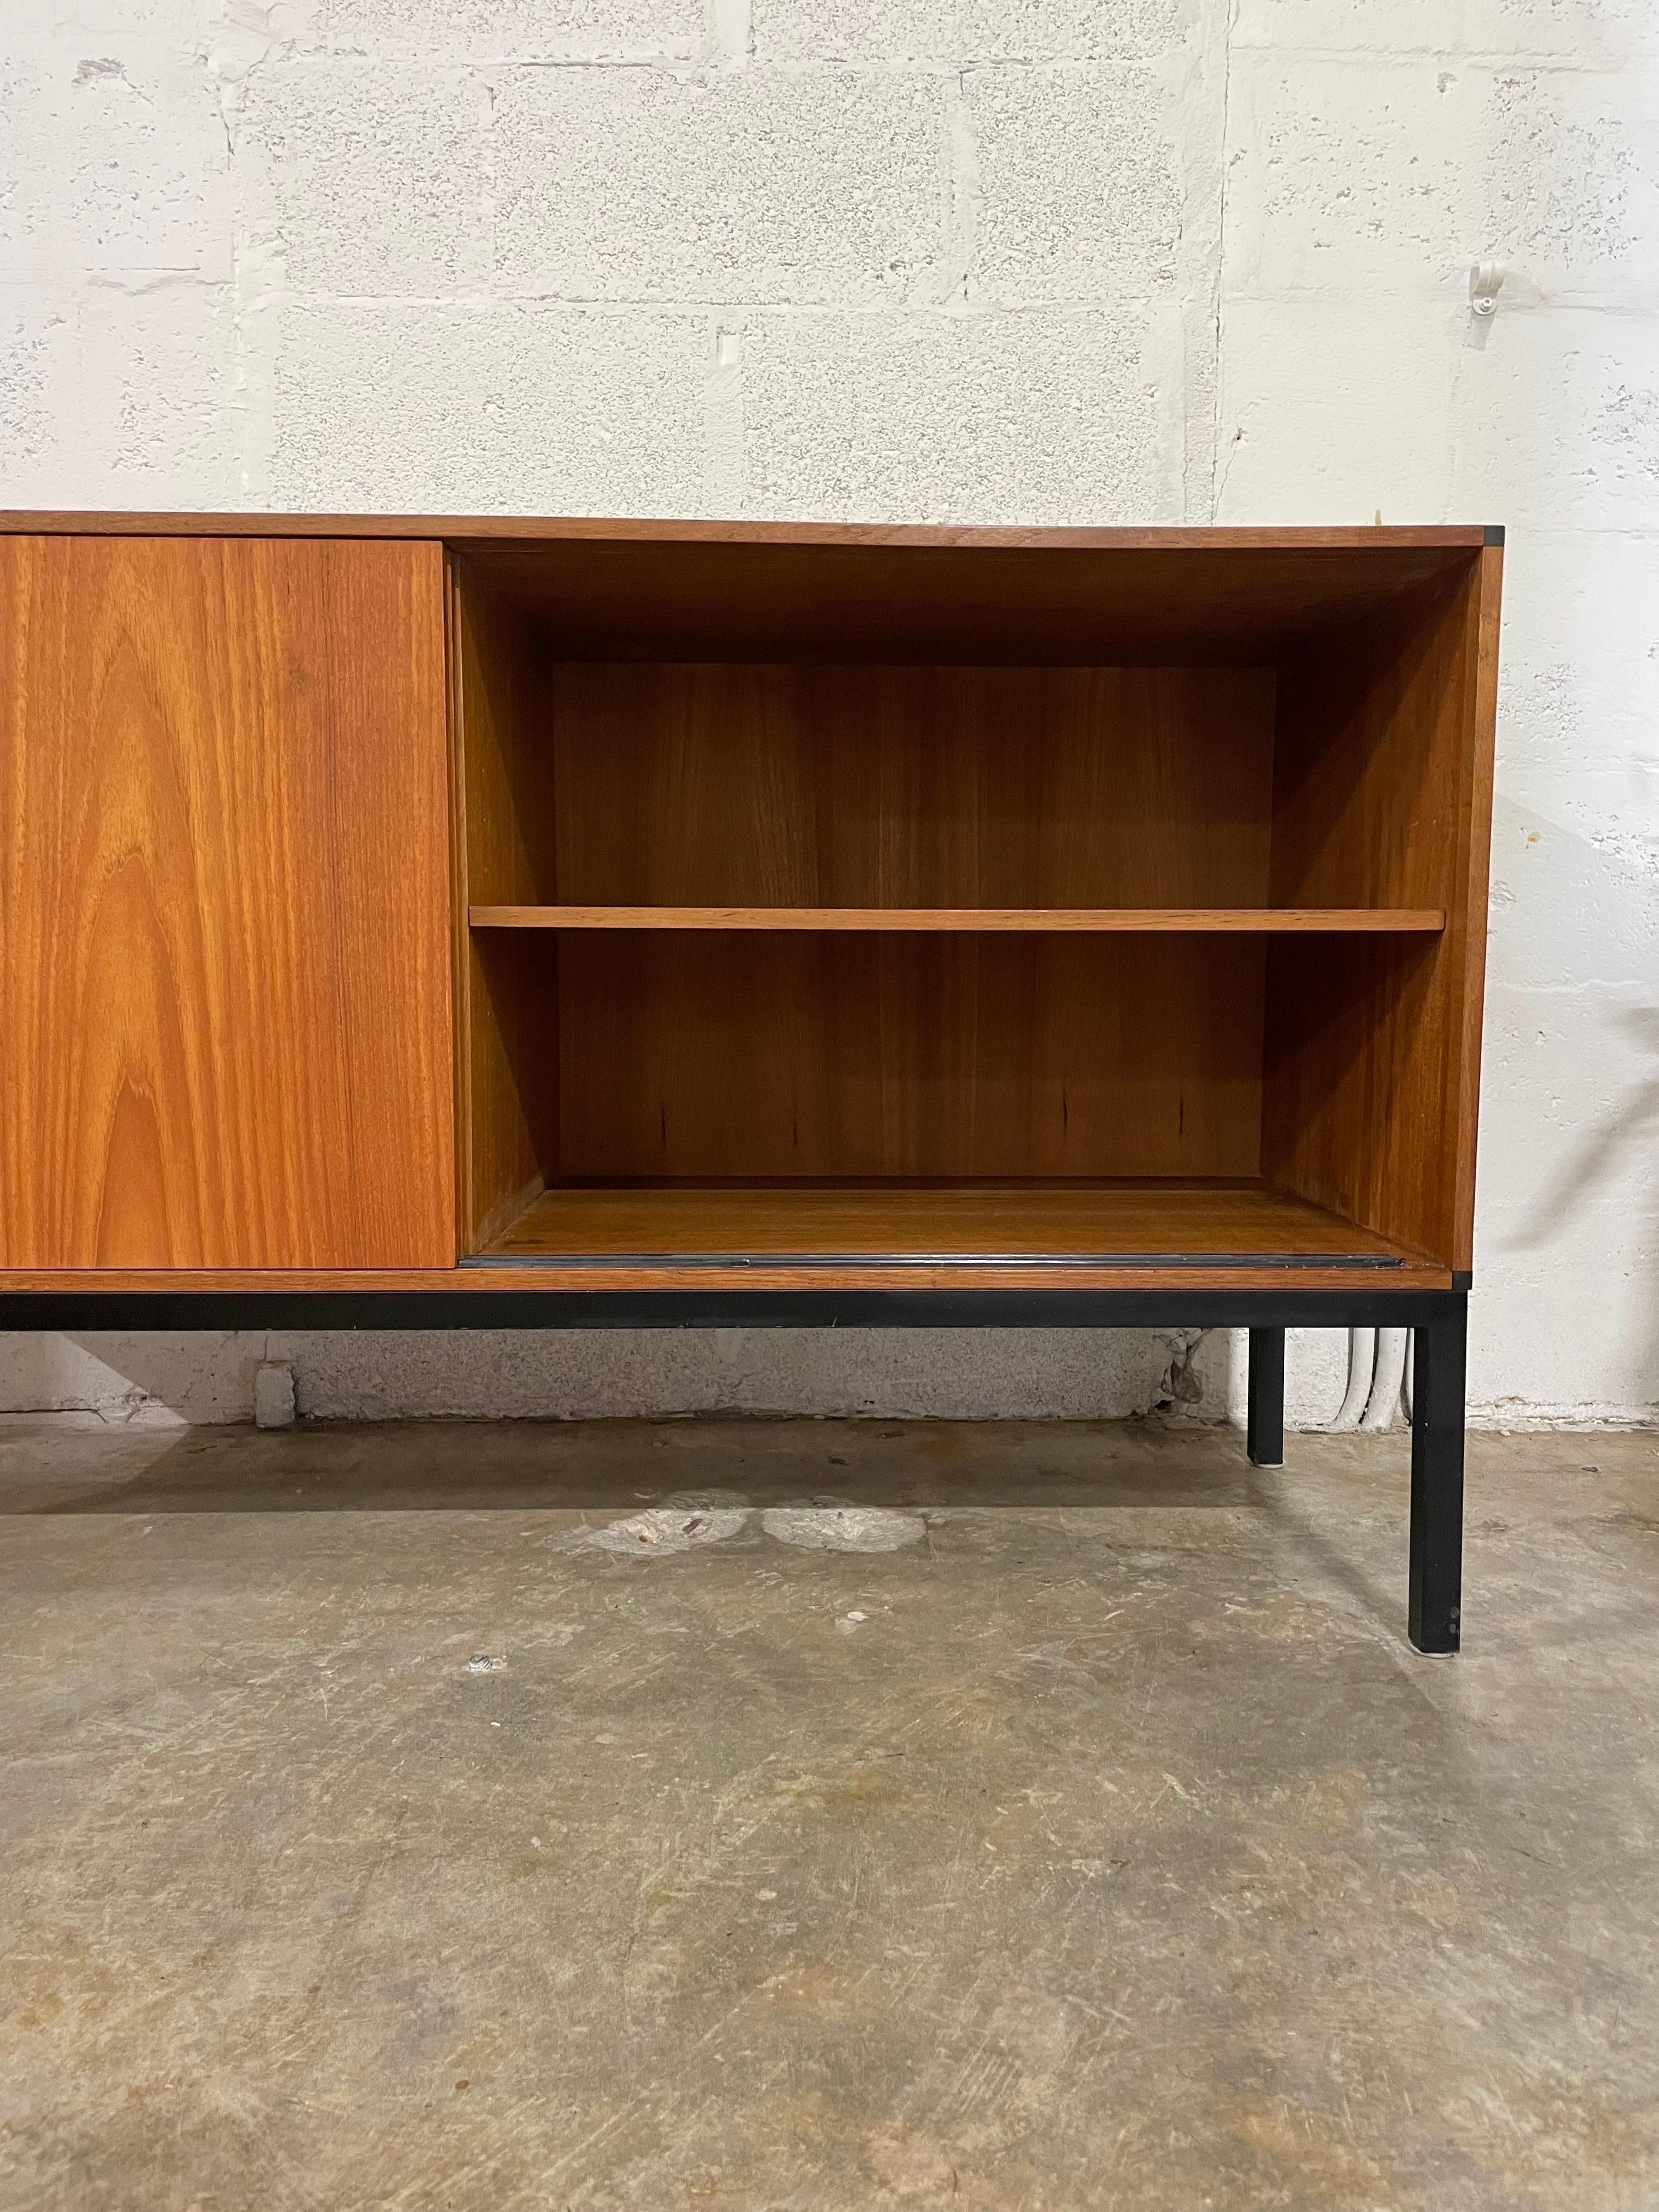 Hans Hove & Palle Petersen Danish Modern Shelving Unit Credenza In Good Condition For Sale In Fort Lauderdale, FL